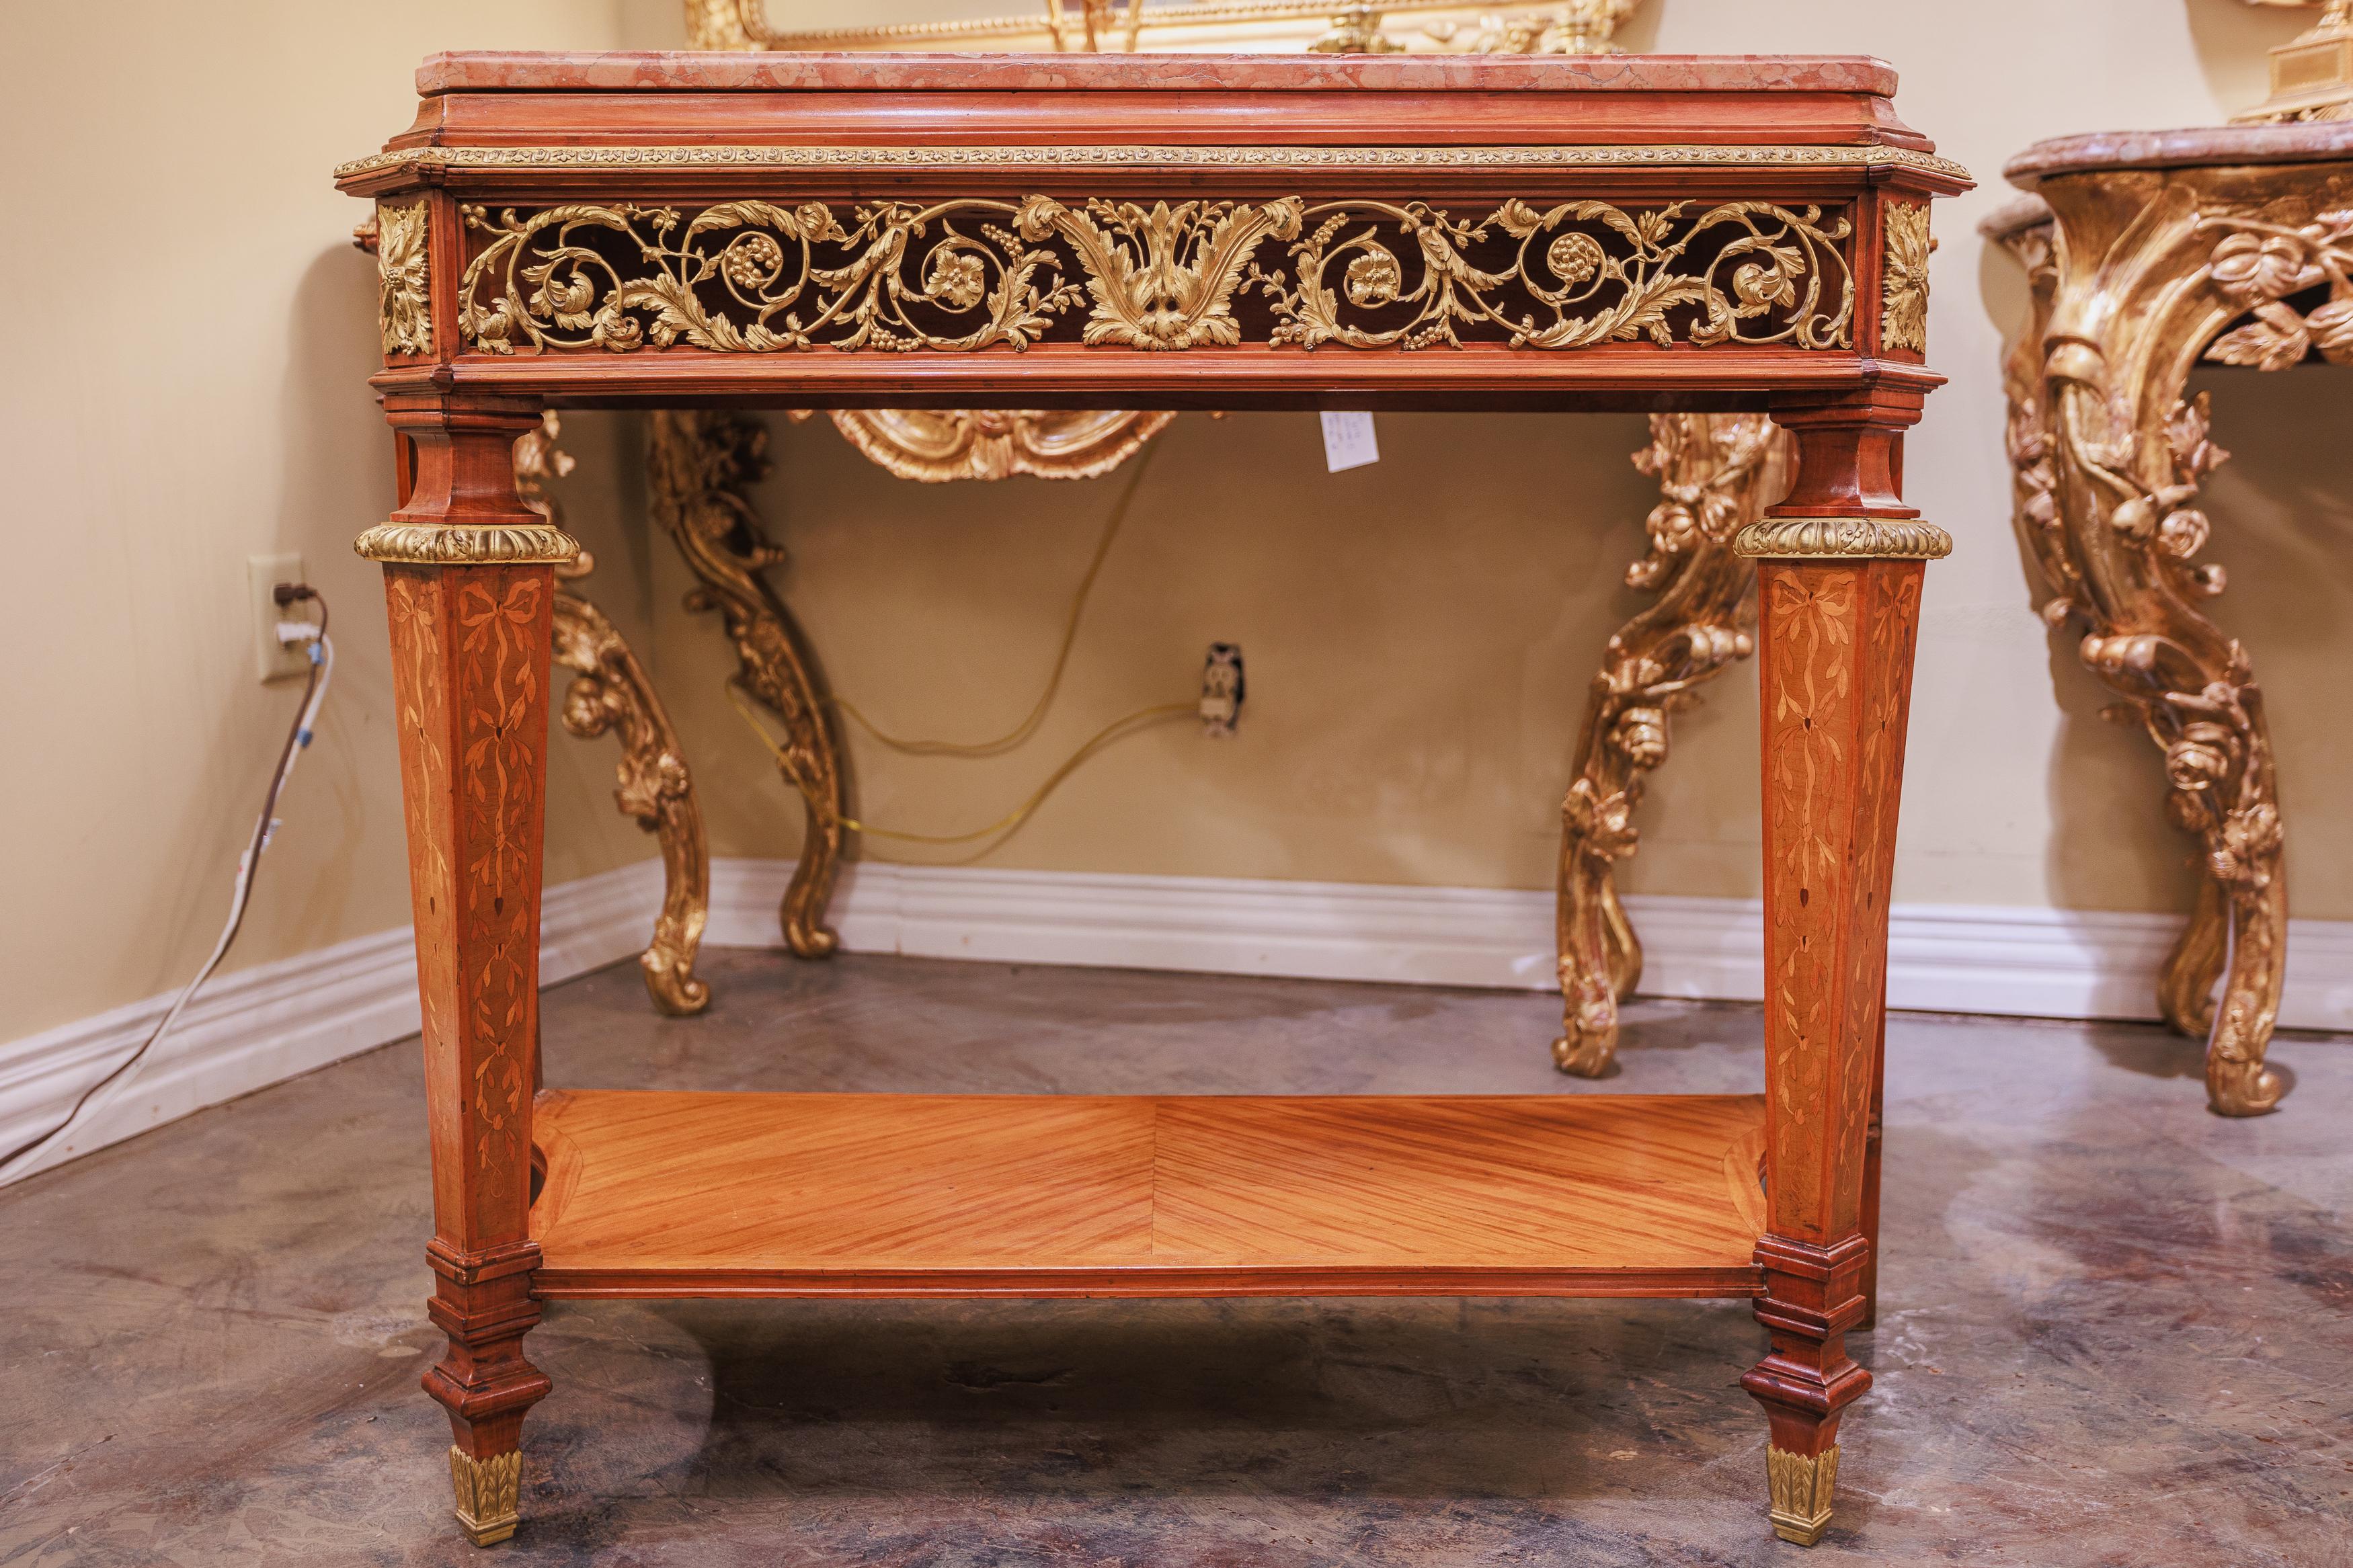 A fine 19th century French Louis XVI mahogany and marble topped console. Signed by French cabinetmaker Maison Forest. Fine gilt bronze details in the frieze. Original marble top